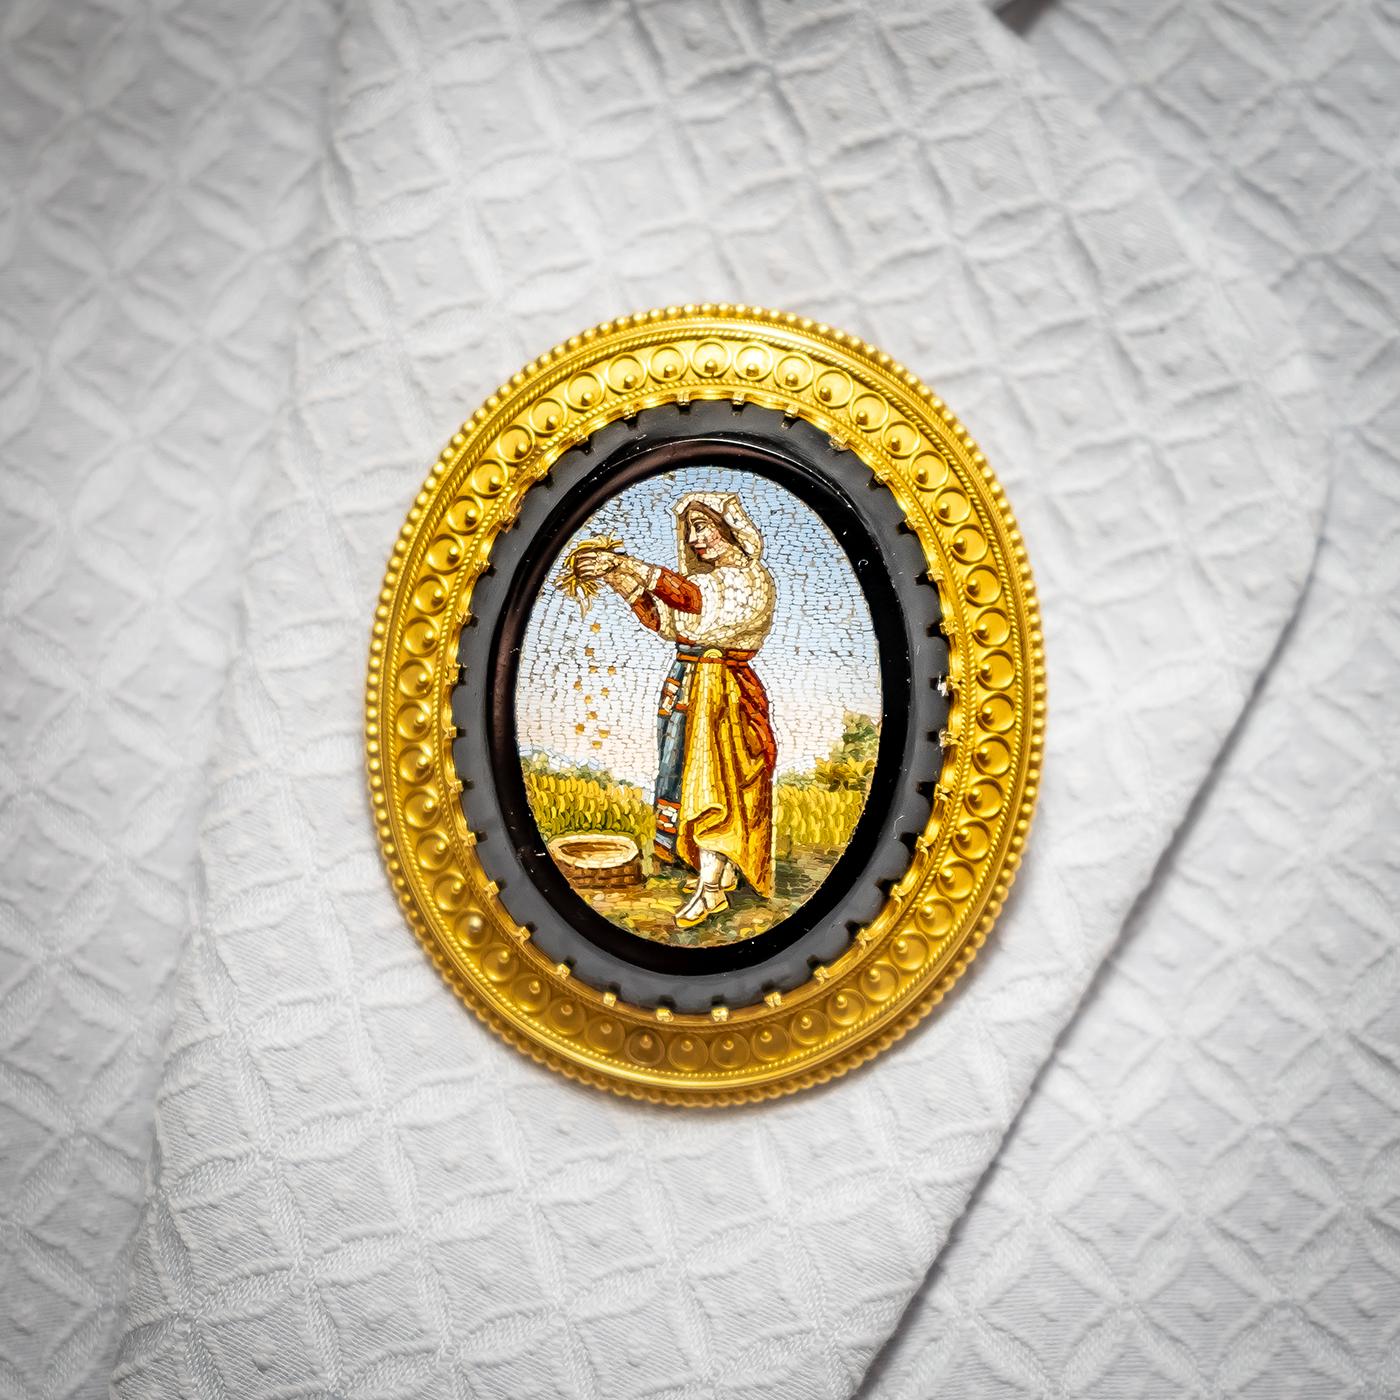 An antique micromosaic brooch, oval image depicting a woman farming crops, backed on black onyx, in an 18ct yellow gold Etruscan style border, with rope and beaded edge detail. Circa 1870's, measure approximately 49 x 58mm
Micromosaic jewellery